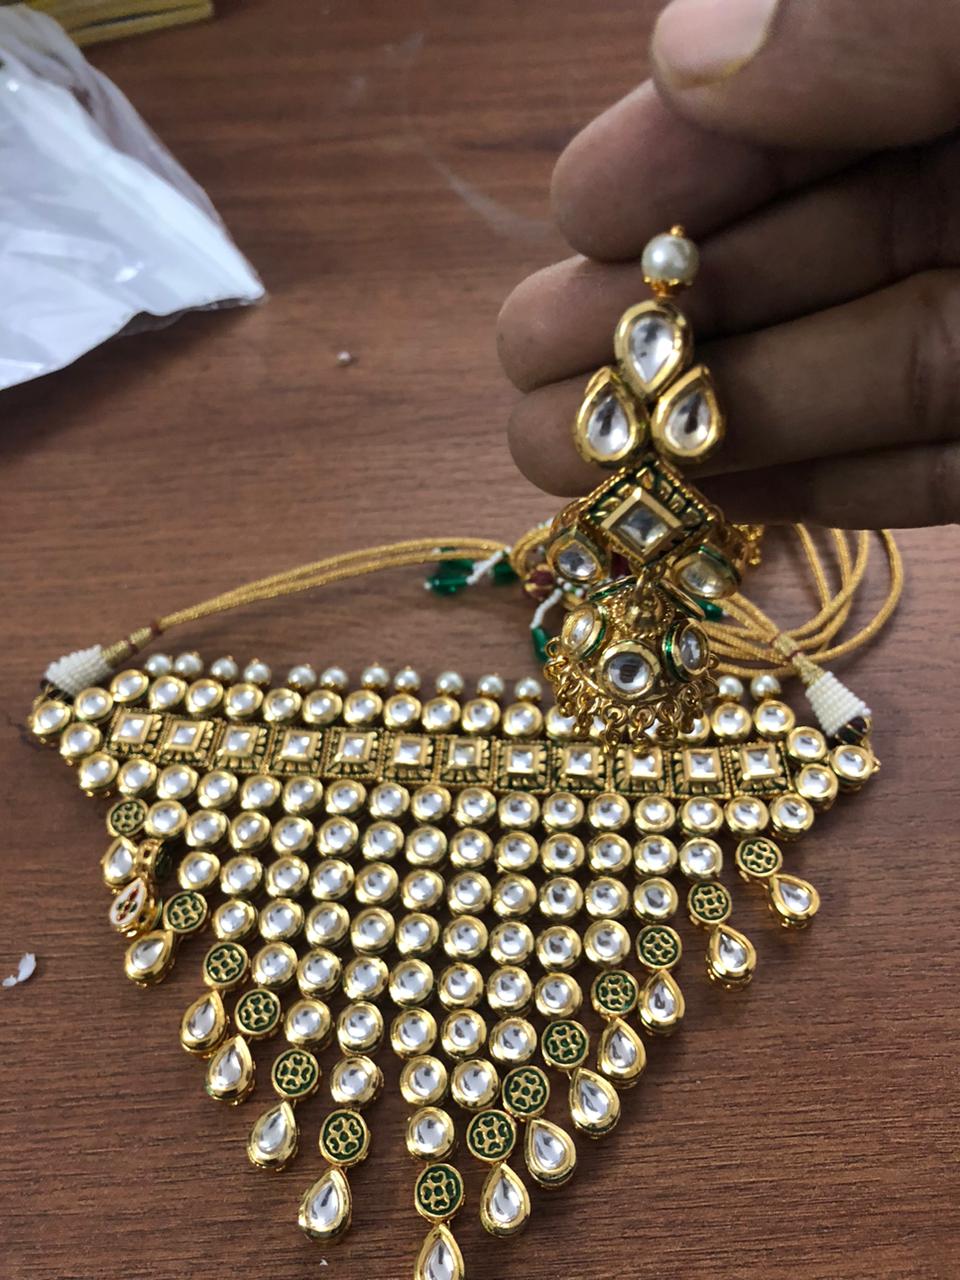 Wedding Shopping Services - Glamour Indian Wear | 2208 Michener St, Philadelphia, PA 19115 | Phone: (215) 341-9990